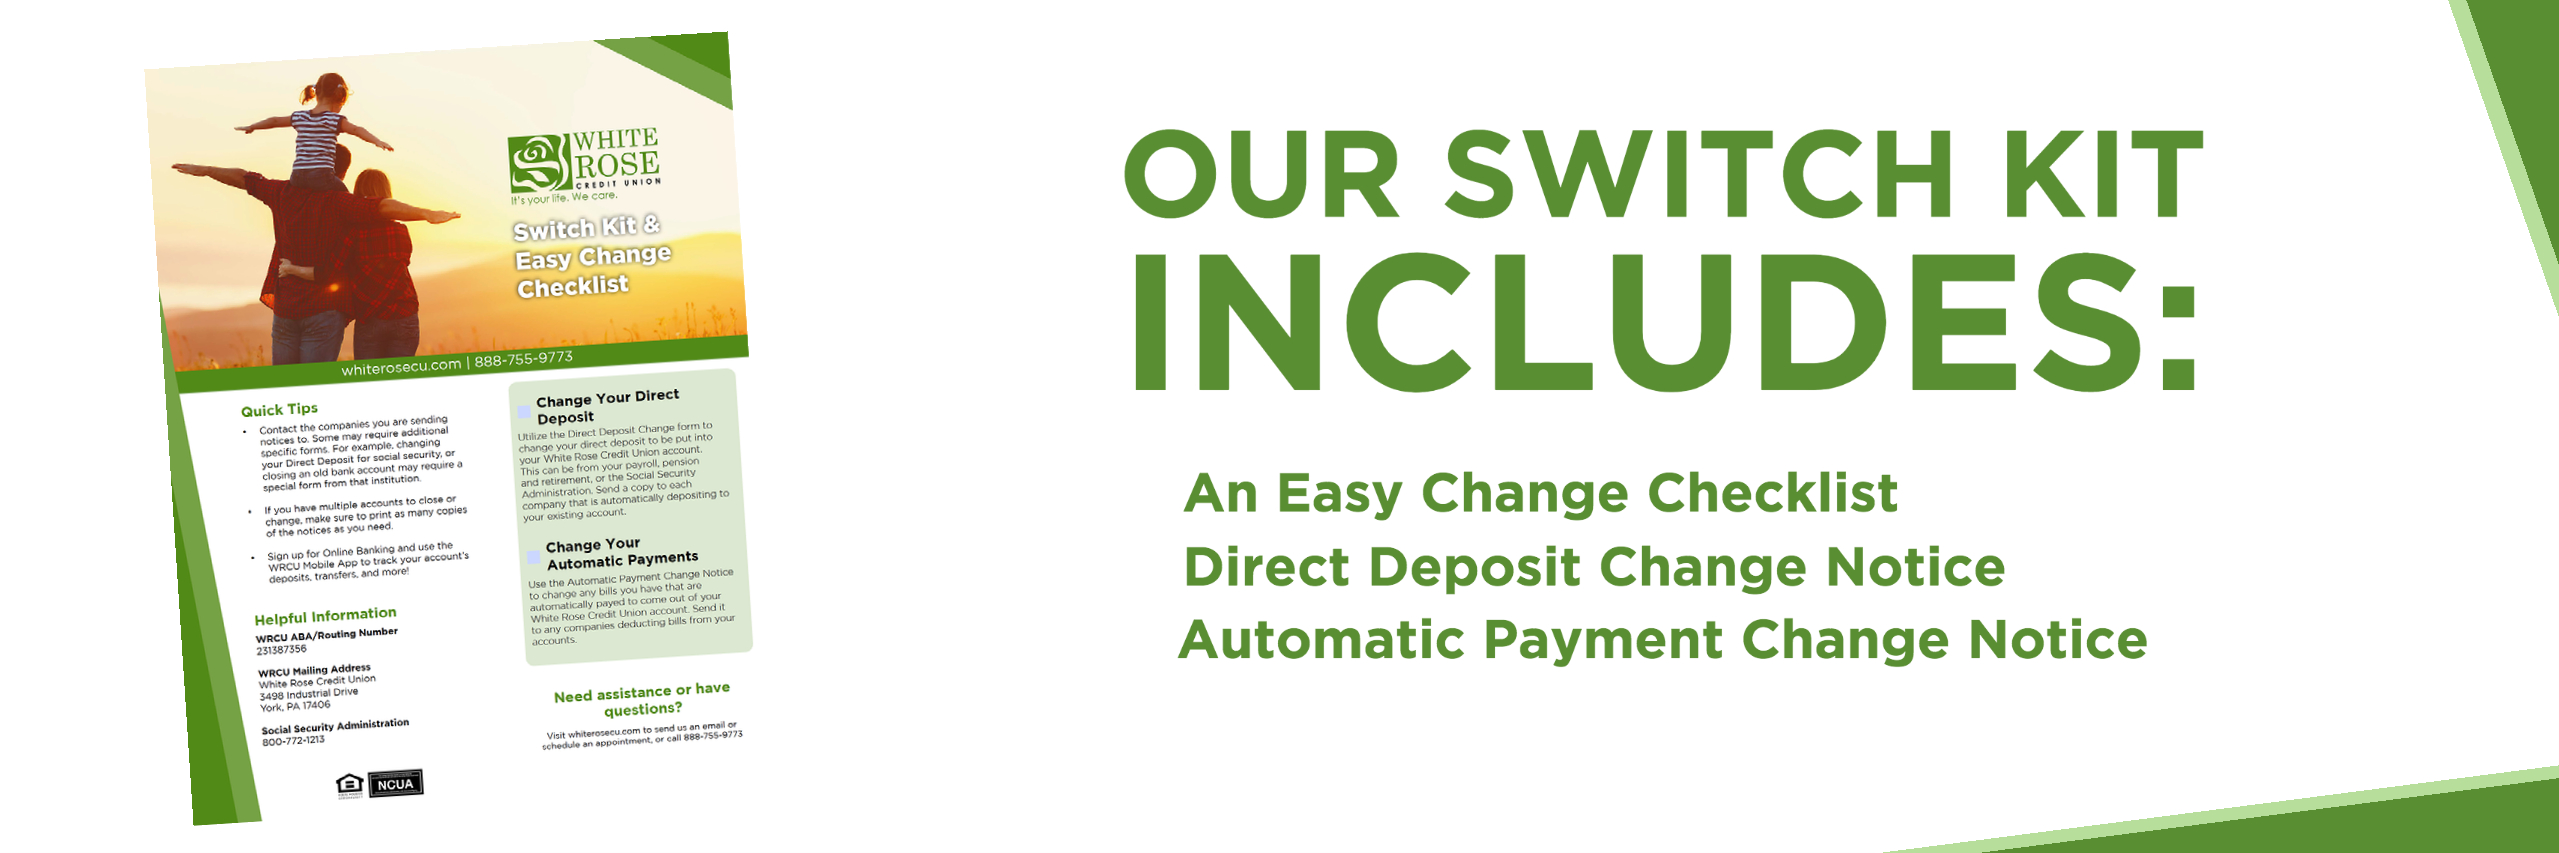 Our Switch Kit includes: An Easy Change Checklist, Direct Deposit Change Notice, Automatic Payment Change Notice